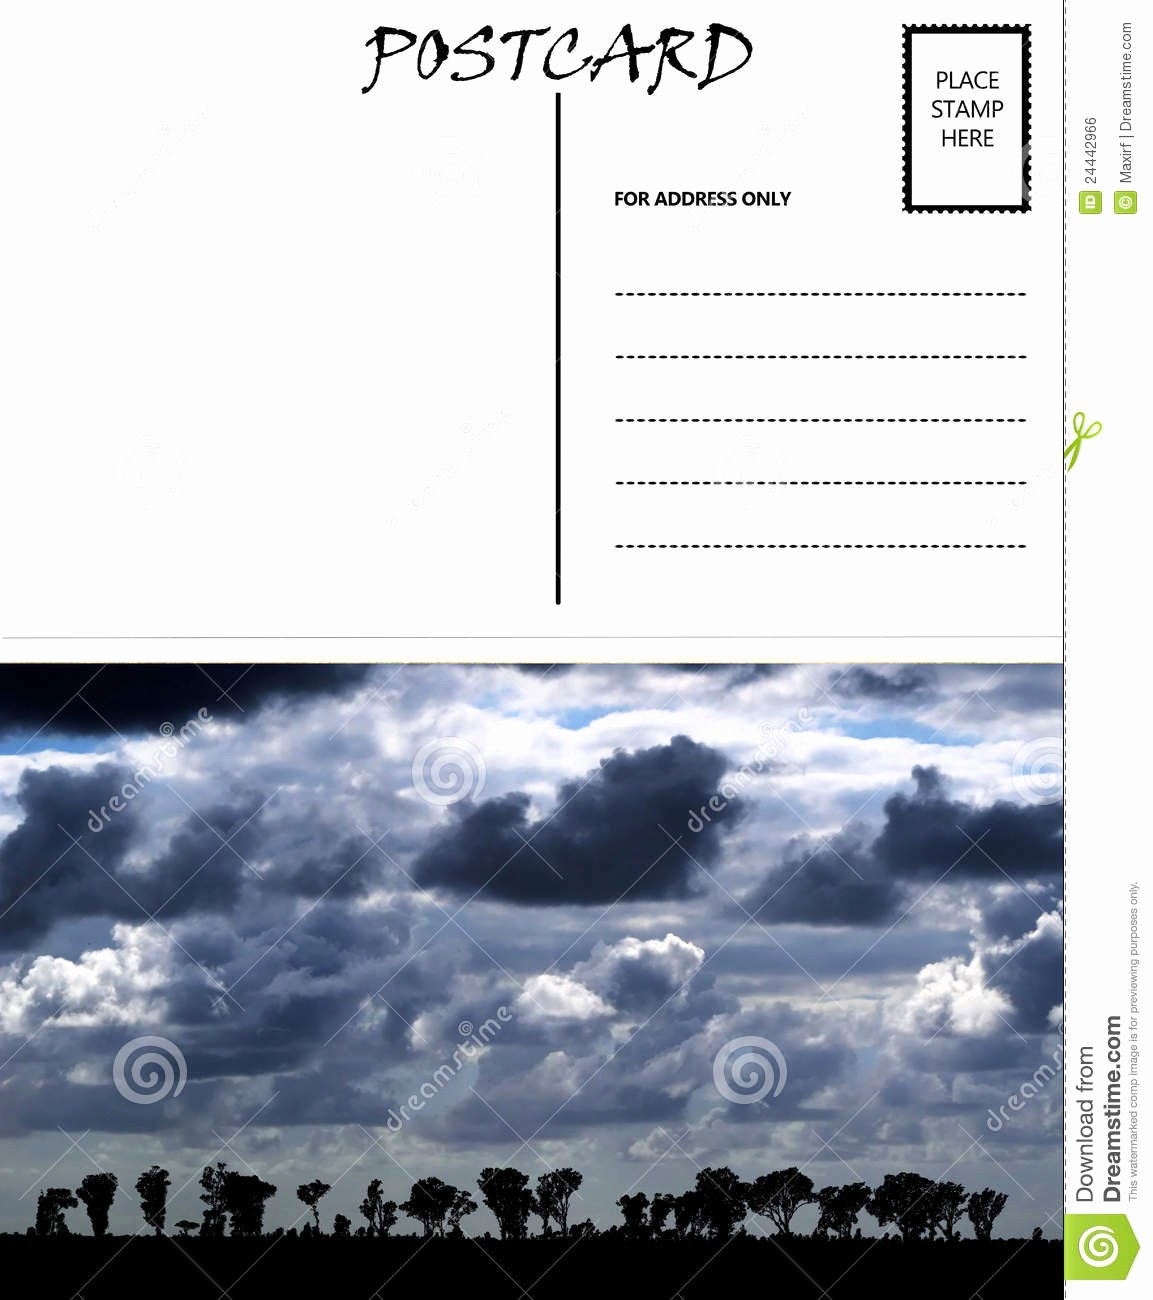 4 Up Postcard Template Awesome Empty Blank Postcard Template Africa Sky Image Stock